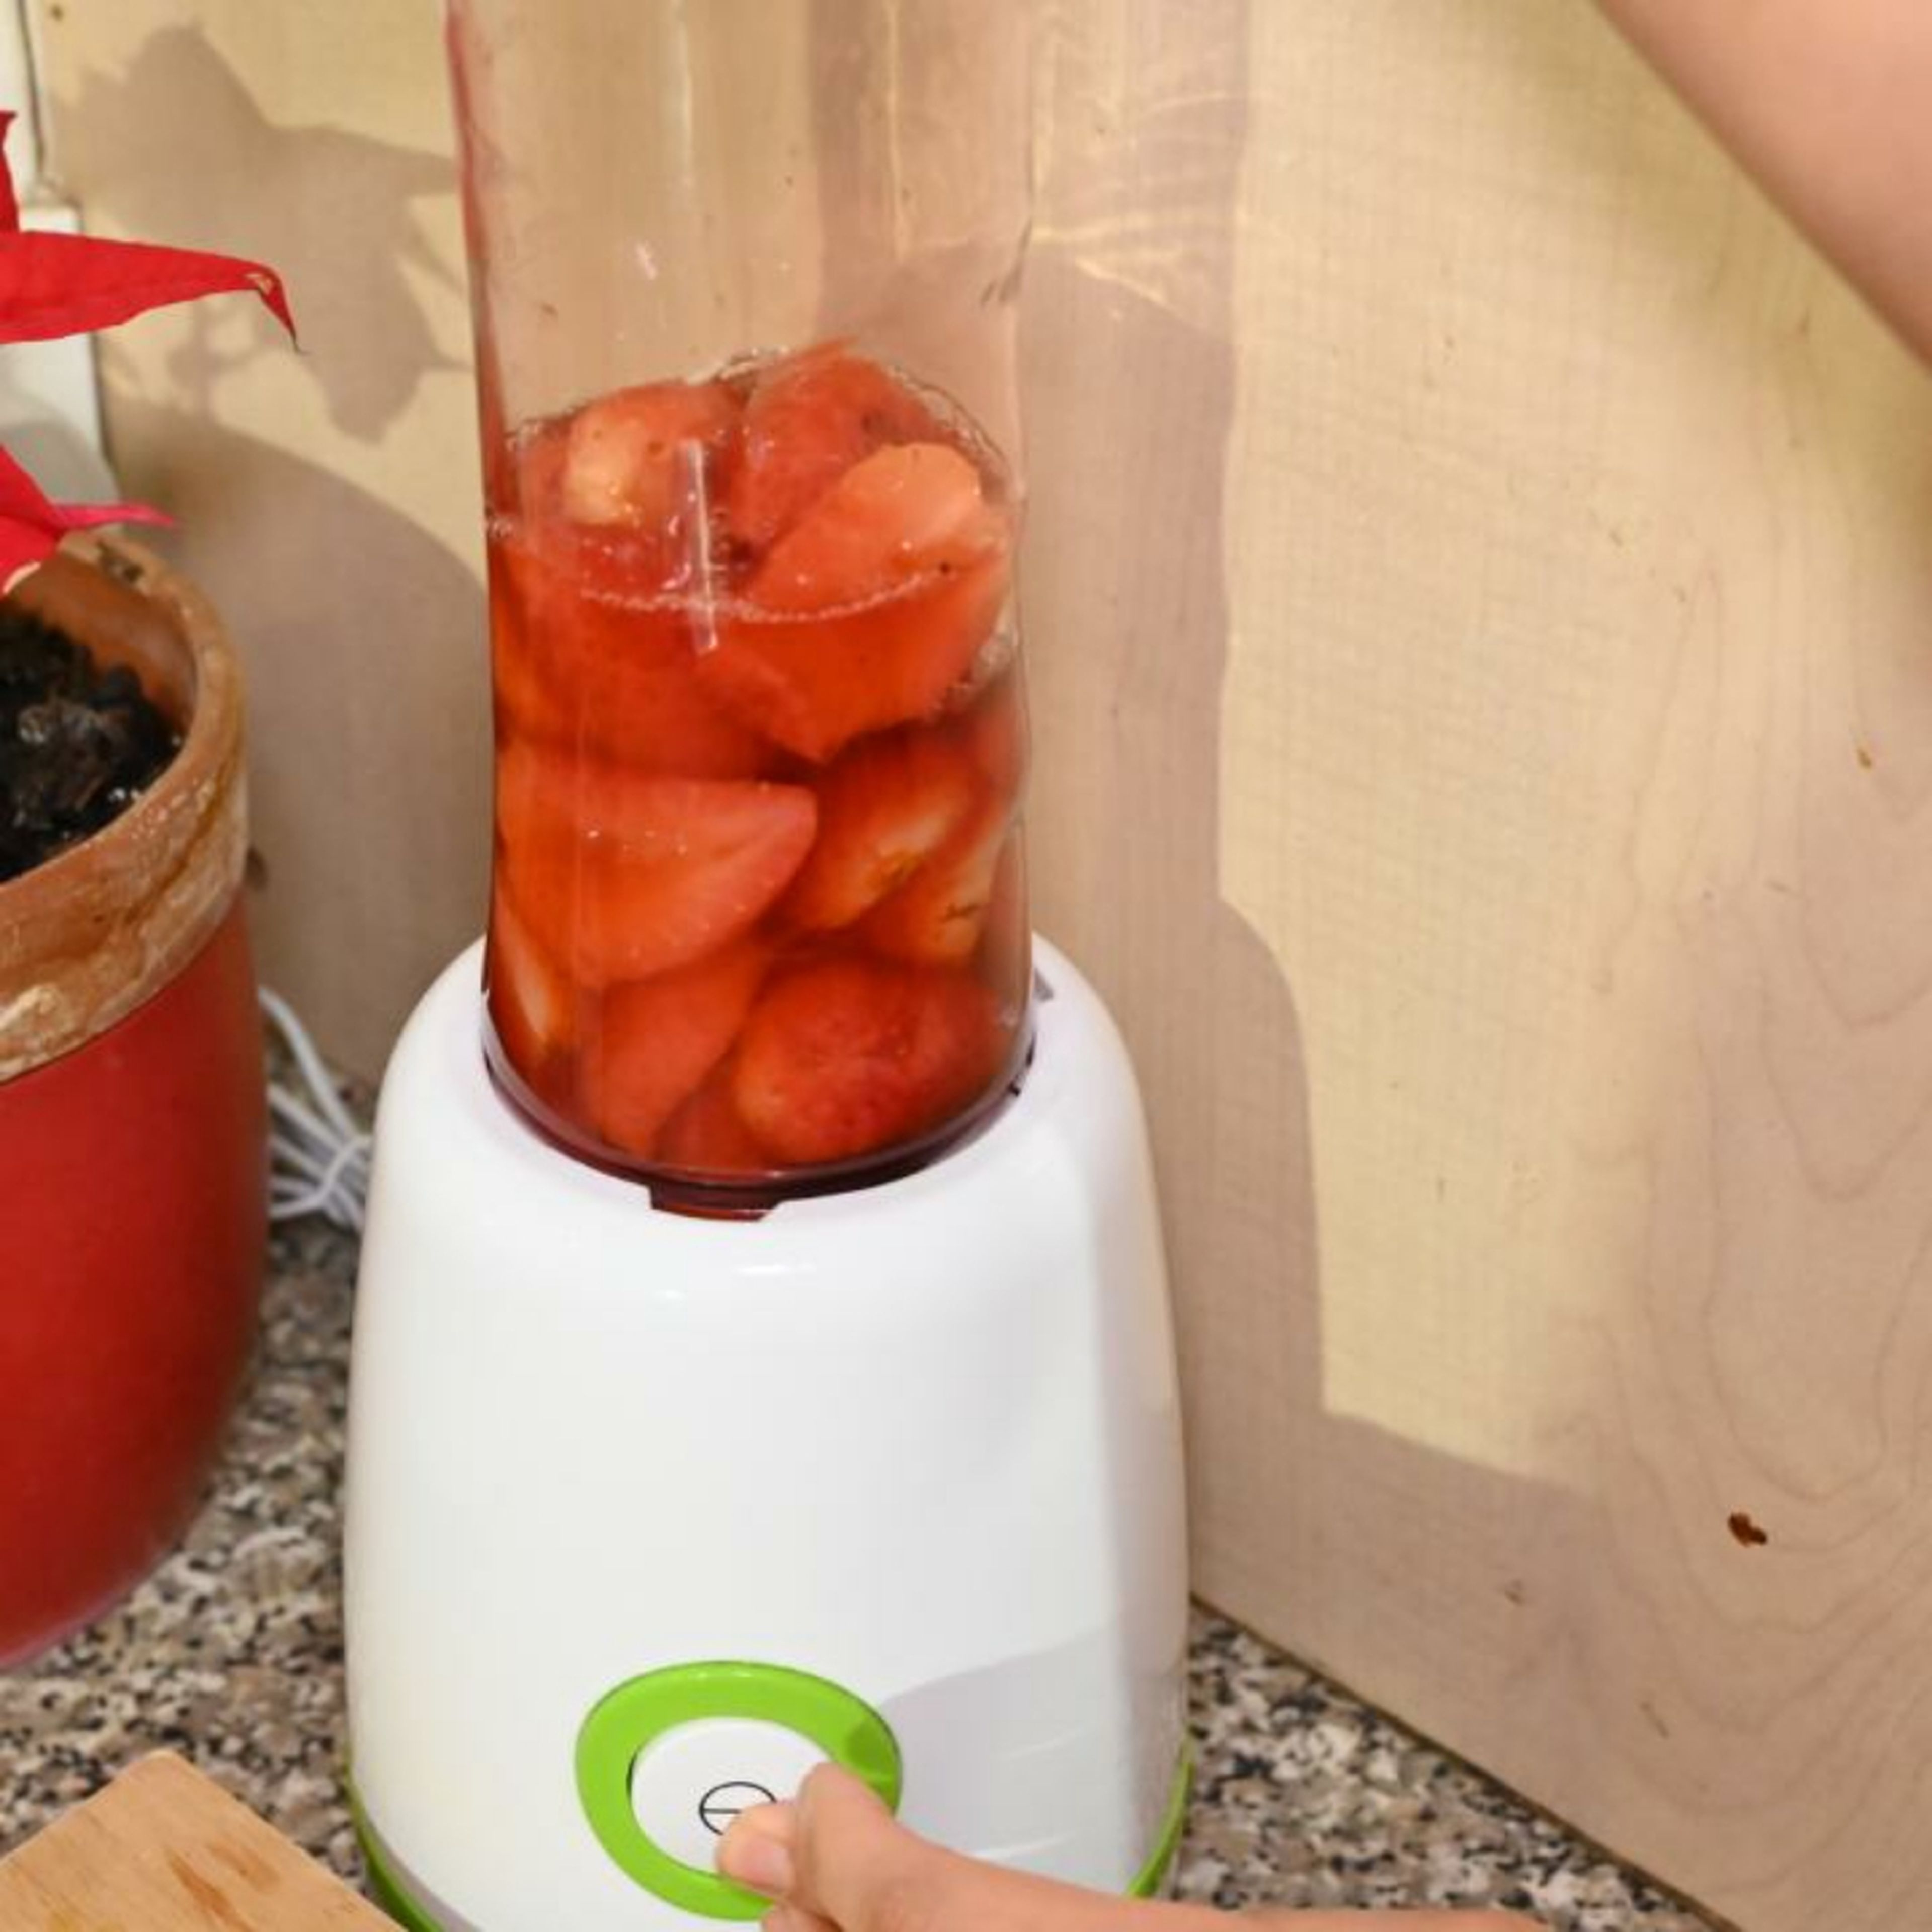 Pour the strawberry coulis into a smoothie maker and blend.